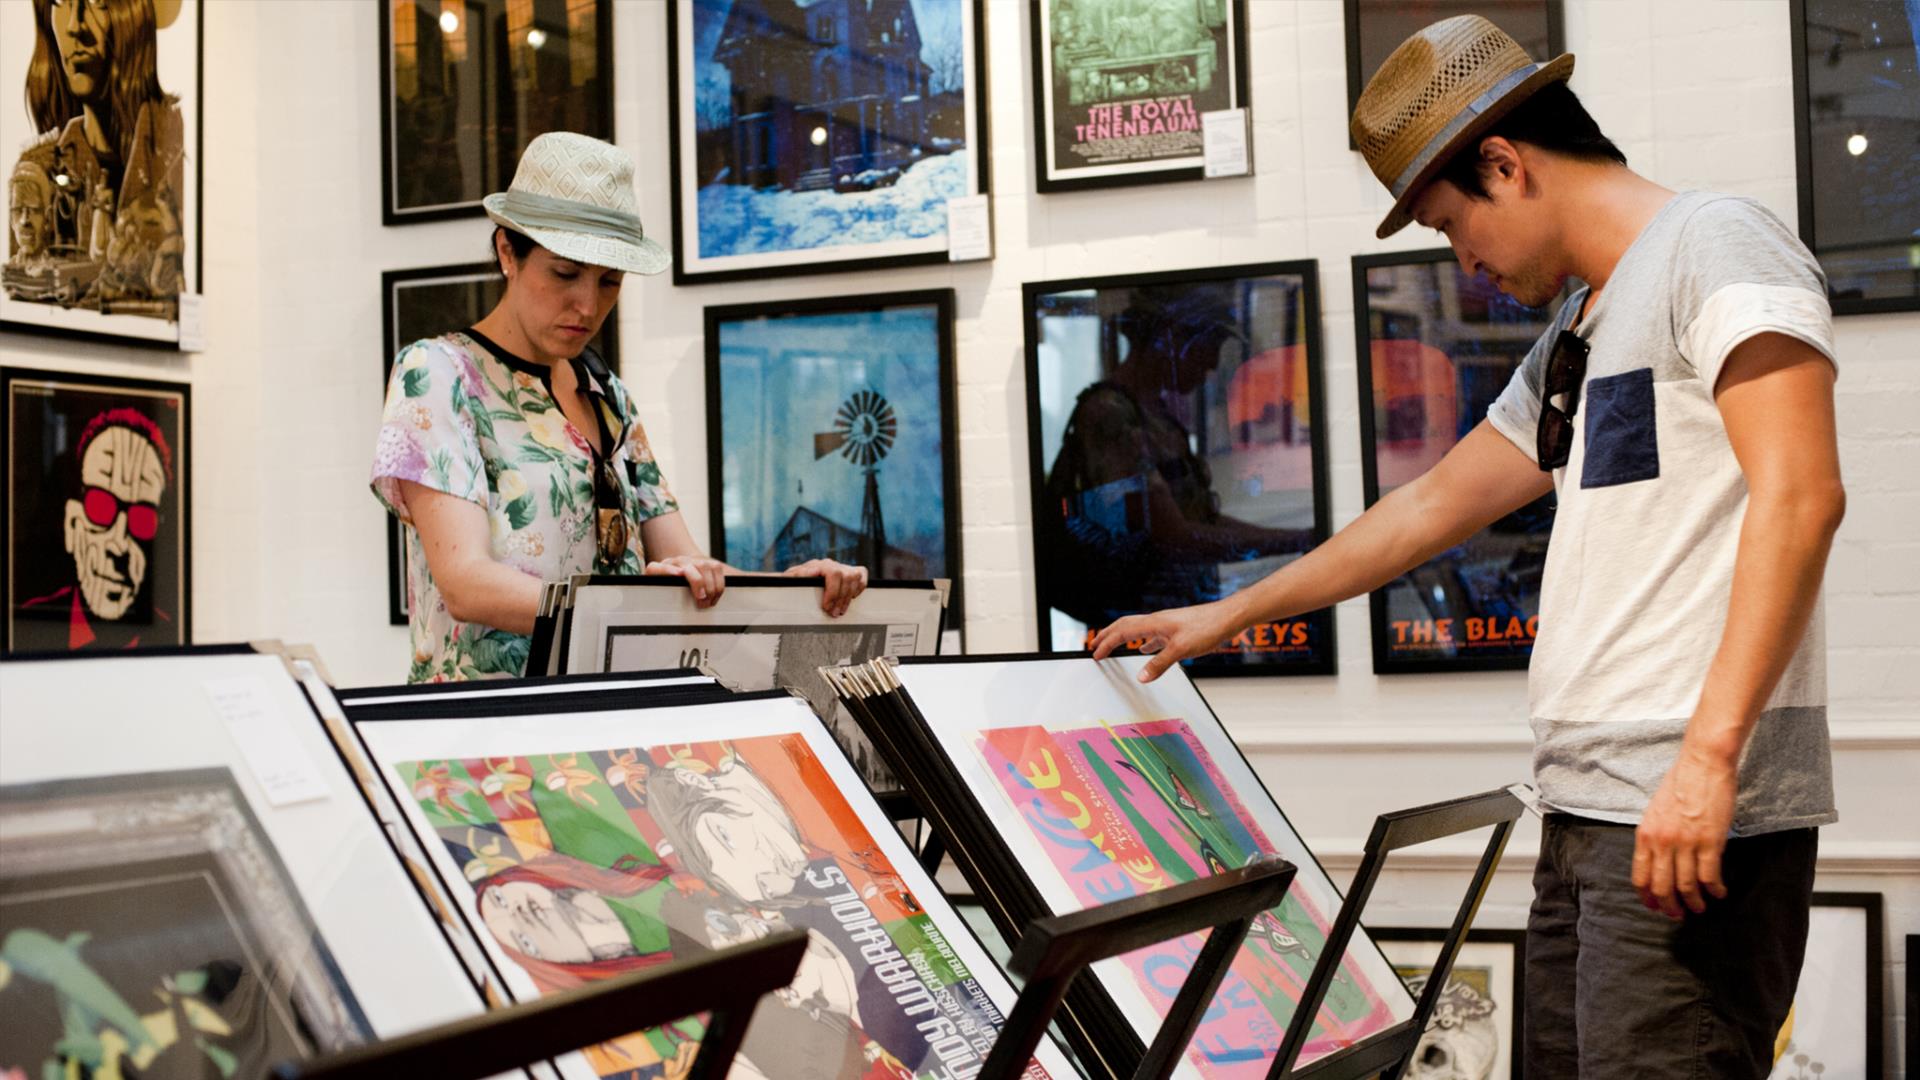 Two people look through prints at a gallery in Greenwich.